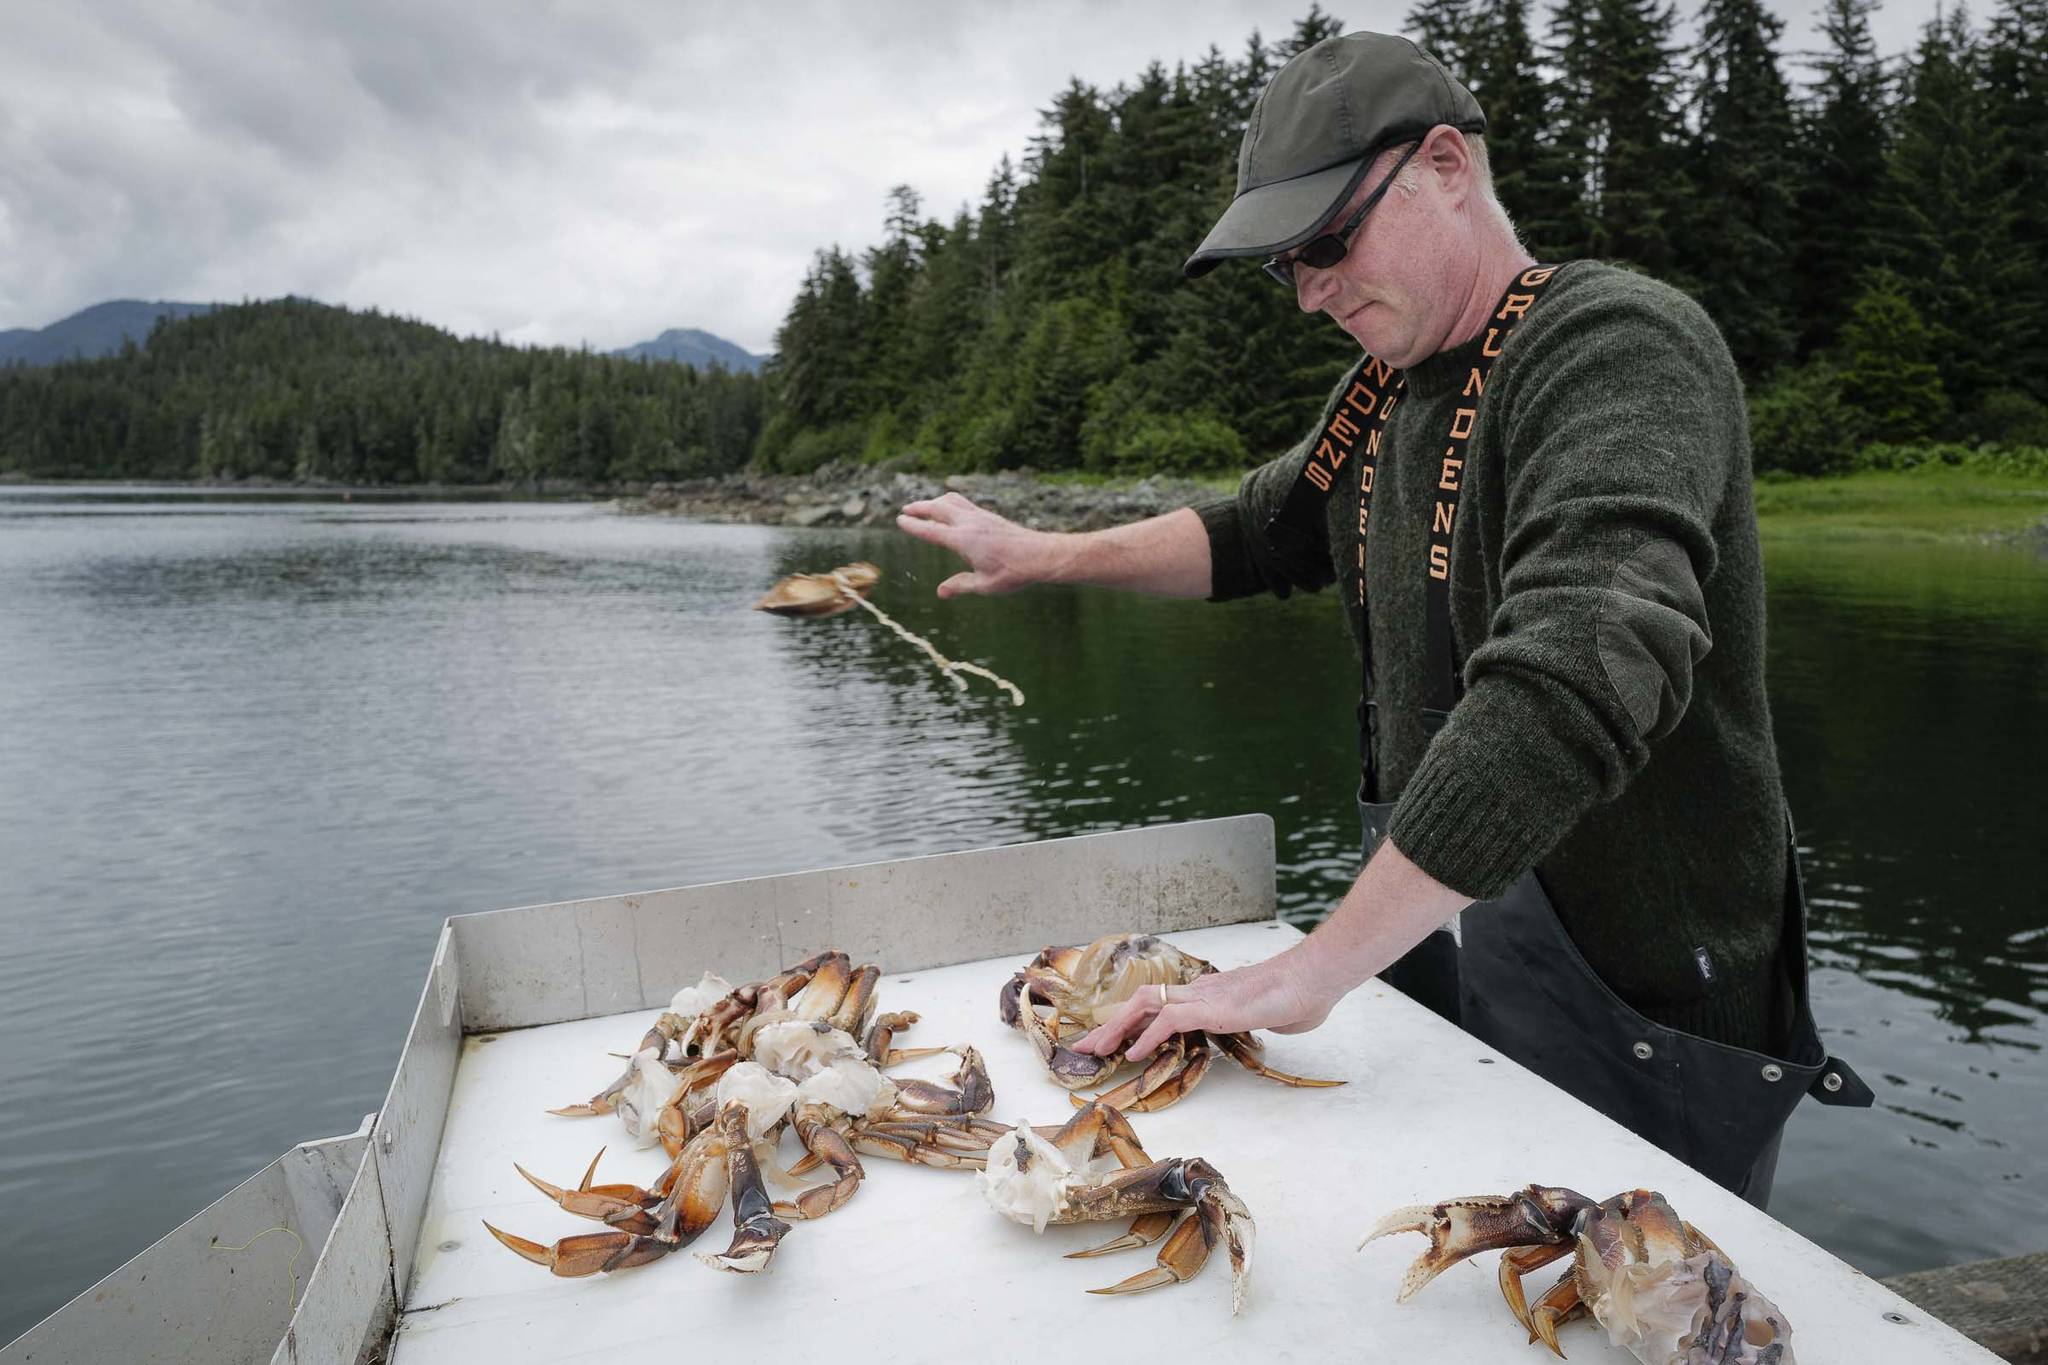 Todd Brocious cleans his crab catch at the Amalga Harbor boat launch on Wednesday, June 19, 2019. (Michael Penn | Juneau Empire)